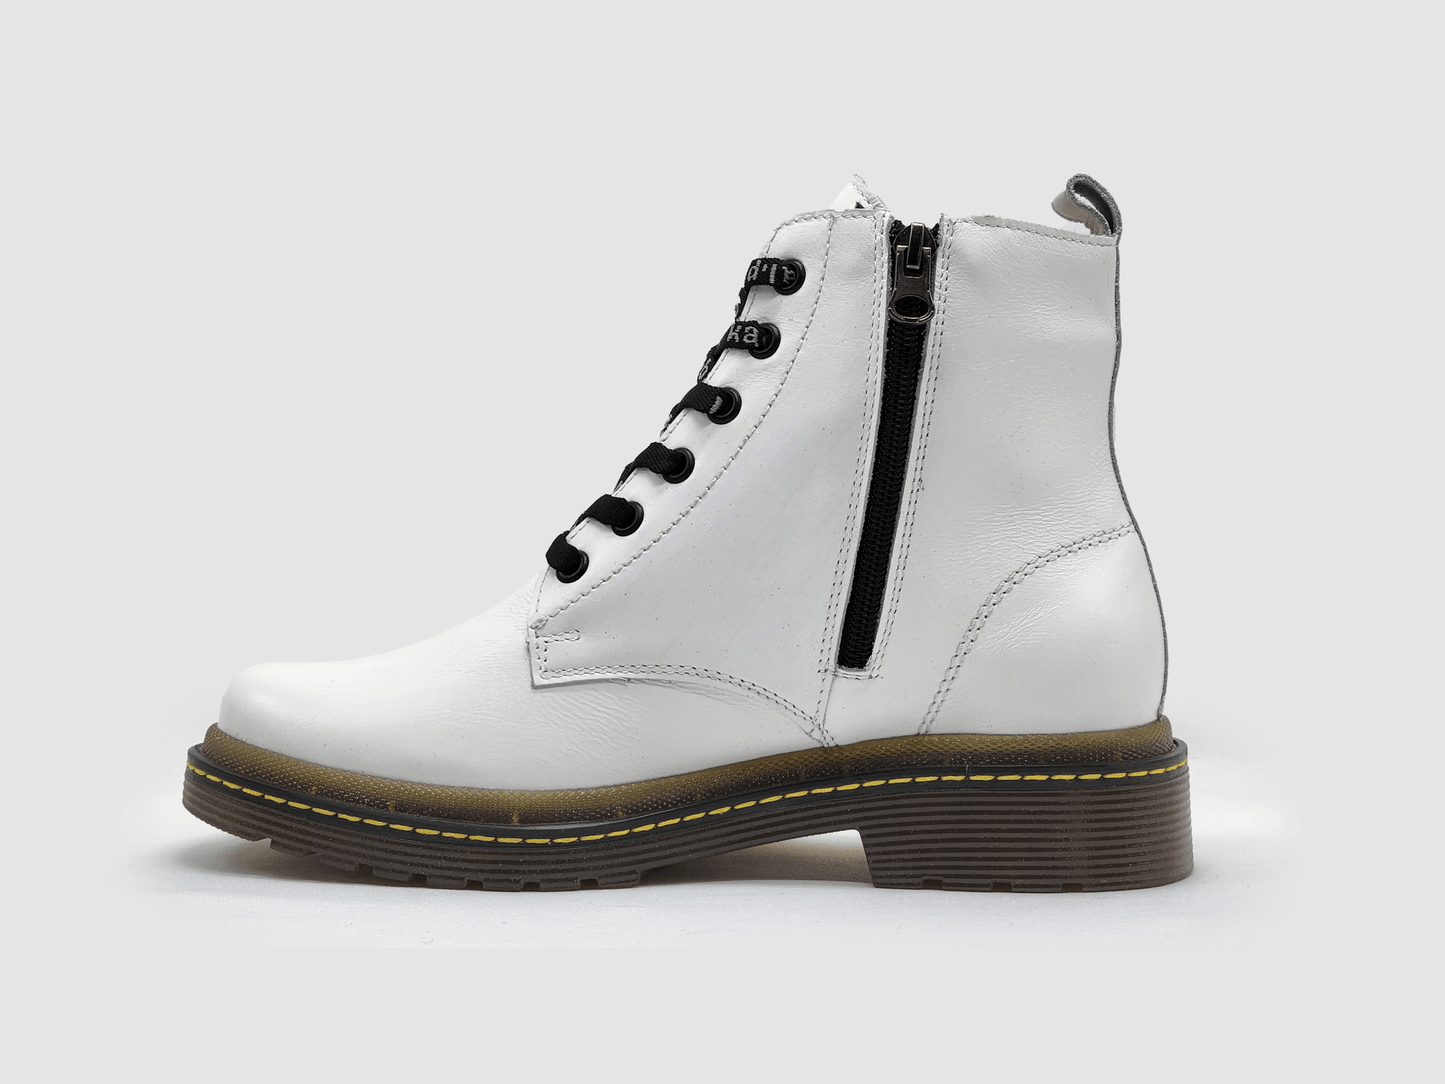 Women's Premium Leather Zip-Up Boots - White - Kacper Global Shoes 